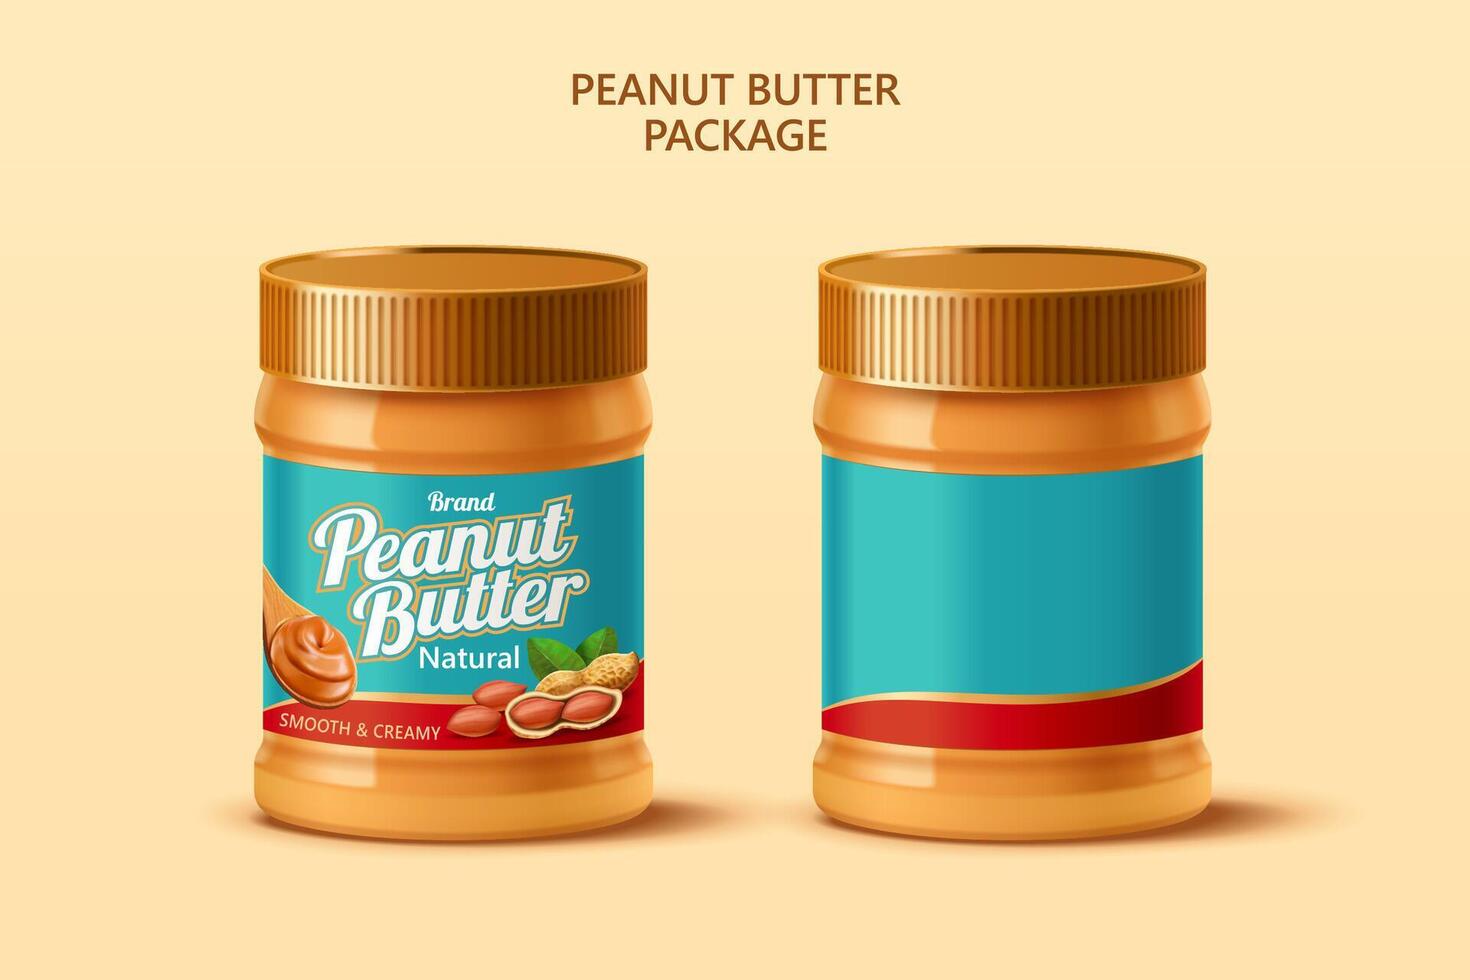 Peanut butter spread mockup template with blank label in 3d illustration over beige background vector